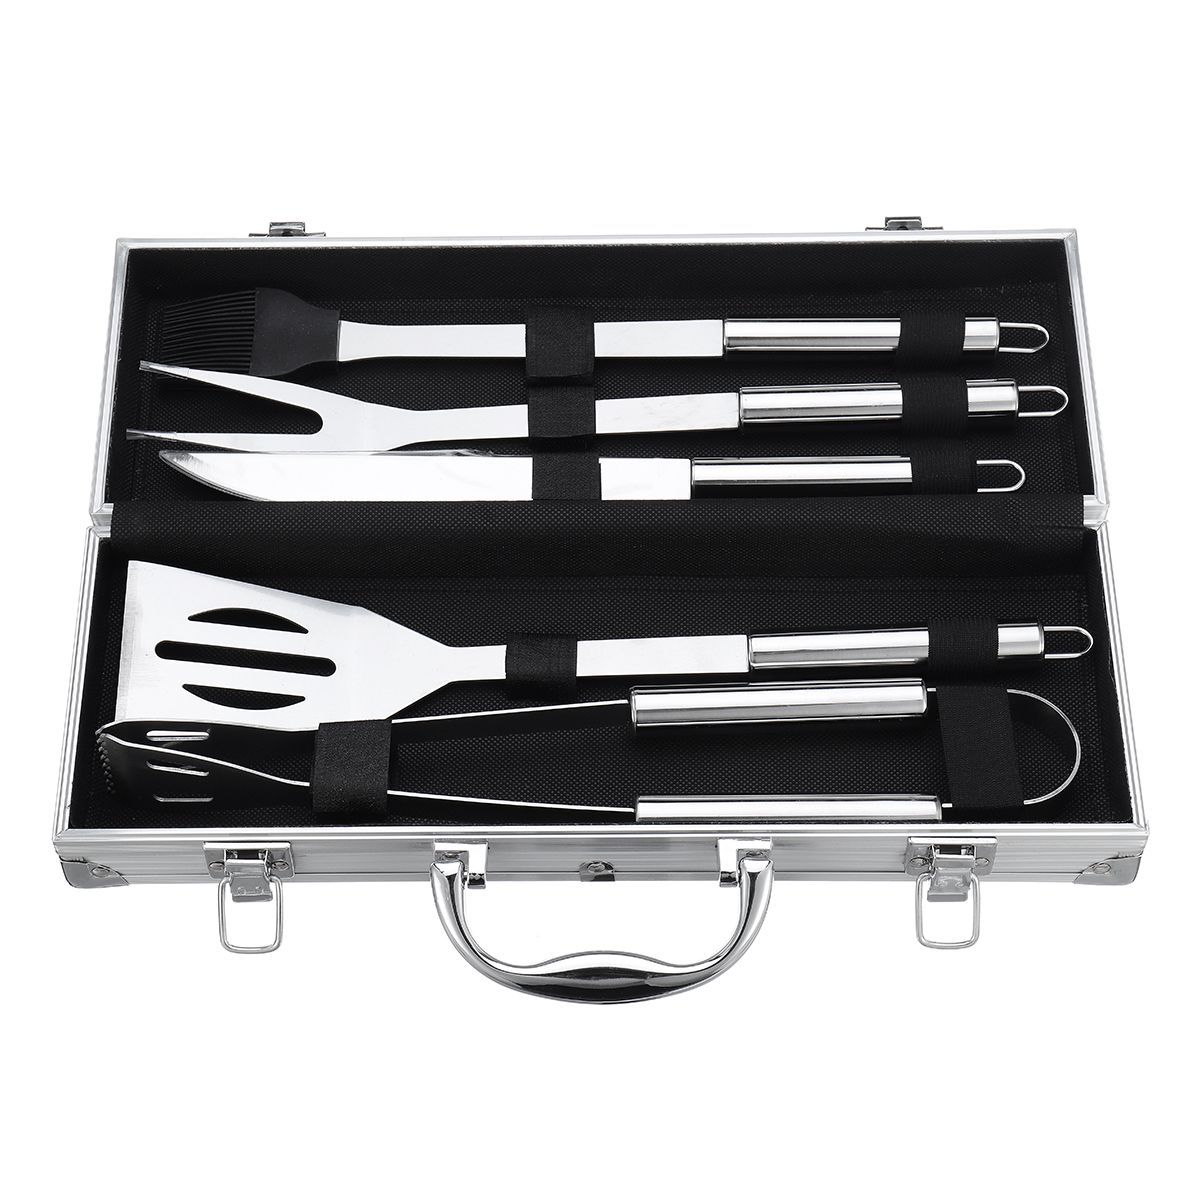 5Pcs26Pcs-Barbecue-Tool-Set-Stainless-Steel-Stick-Fork-Brush-Spatula-BBQ-Accessories-1434366